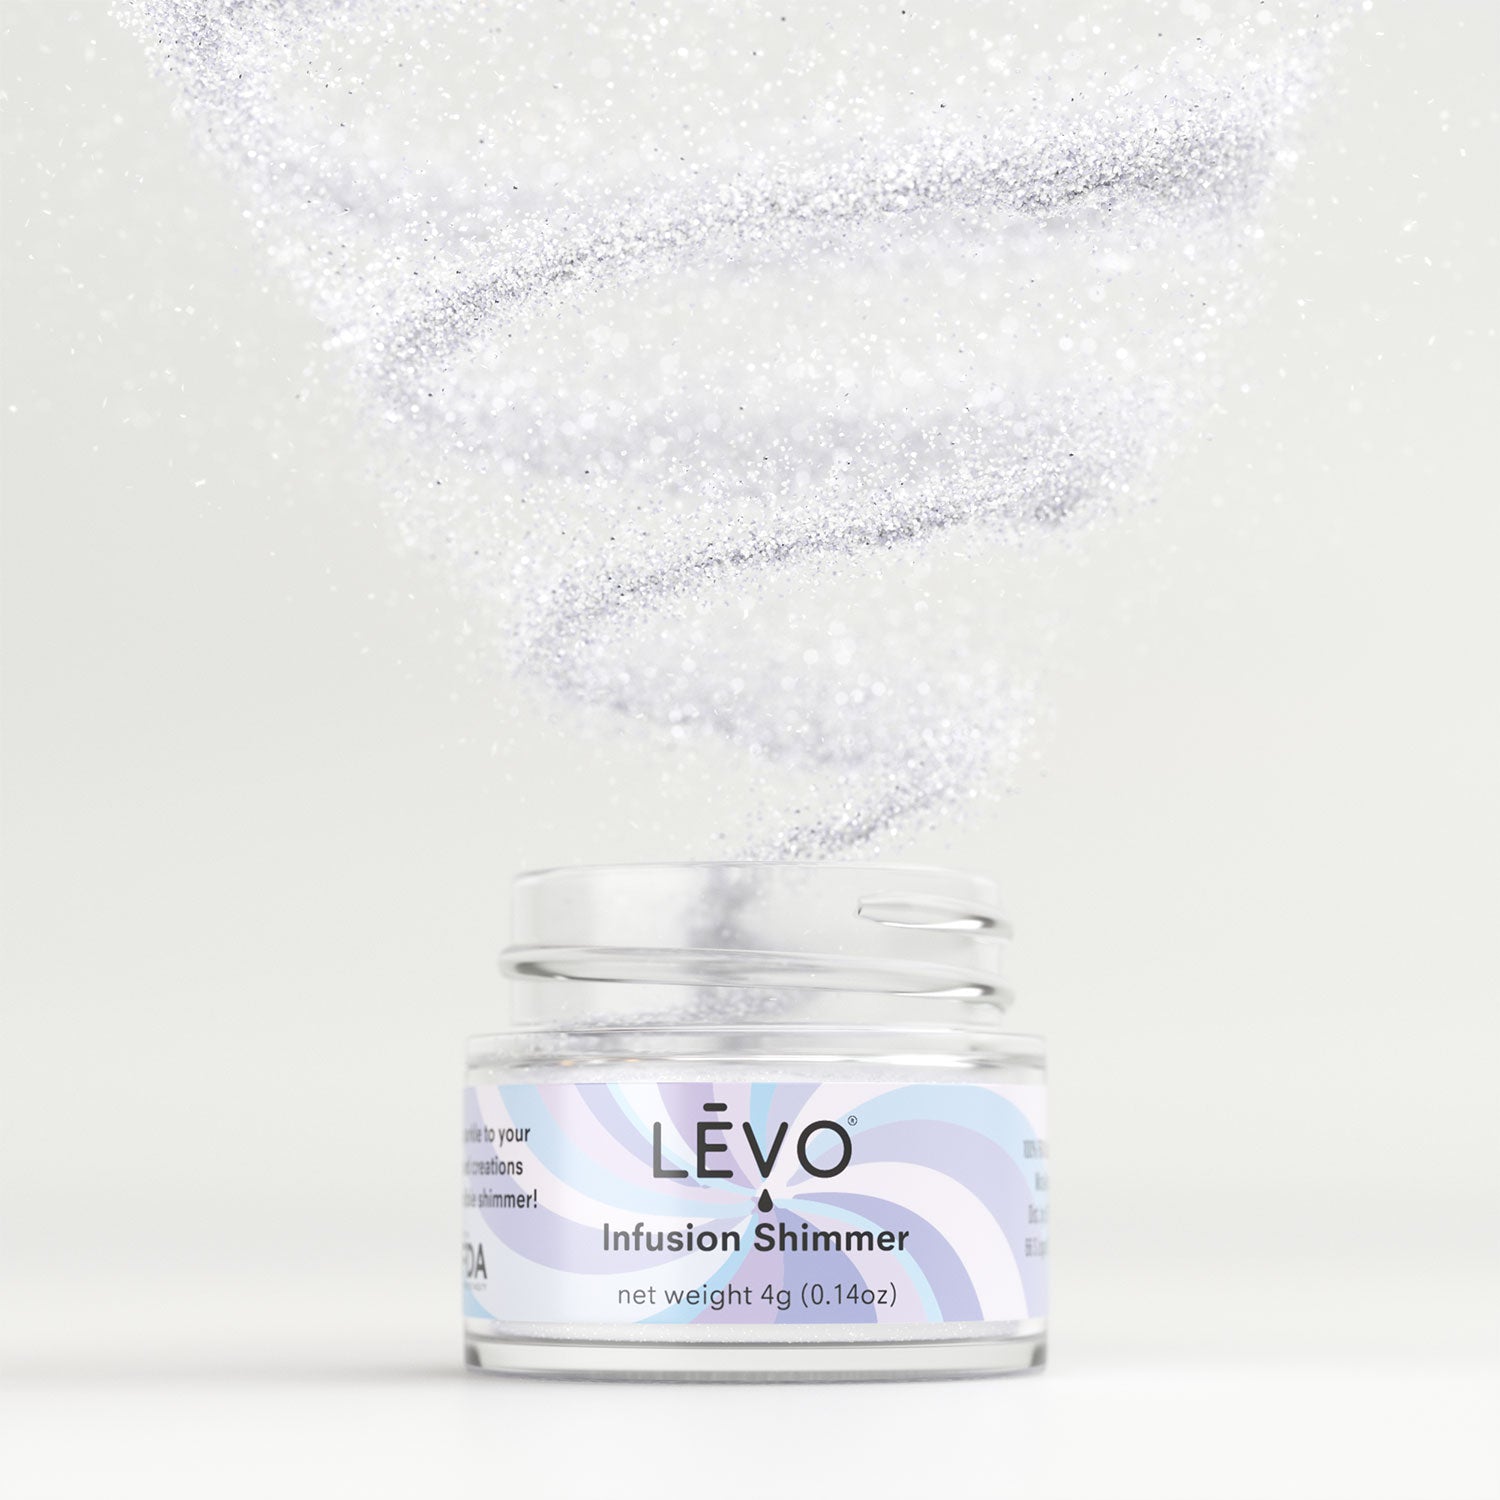 Add an iridescent shimmer to your infused topicals, beverages, oils, and gummies with LEVO edible infusion shimmer.